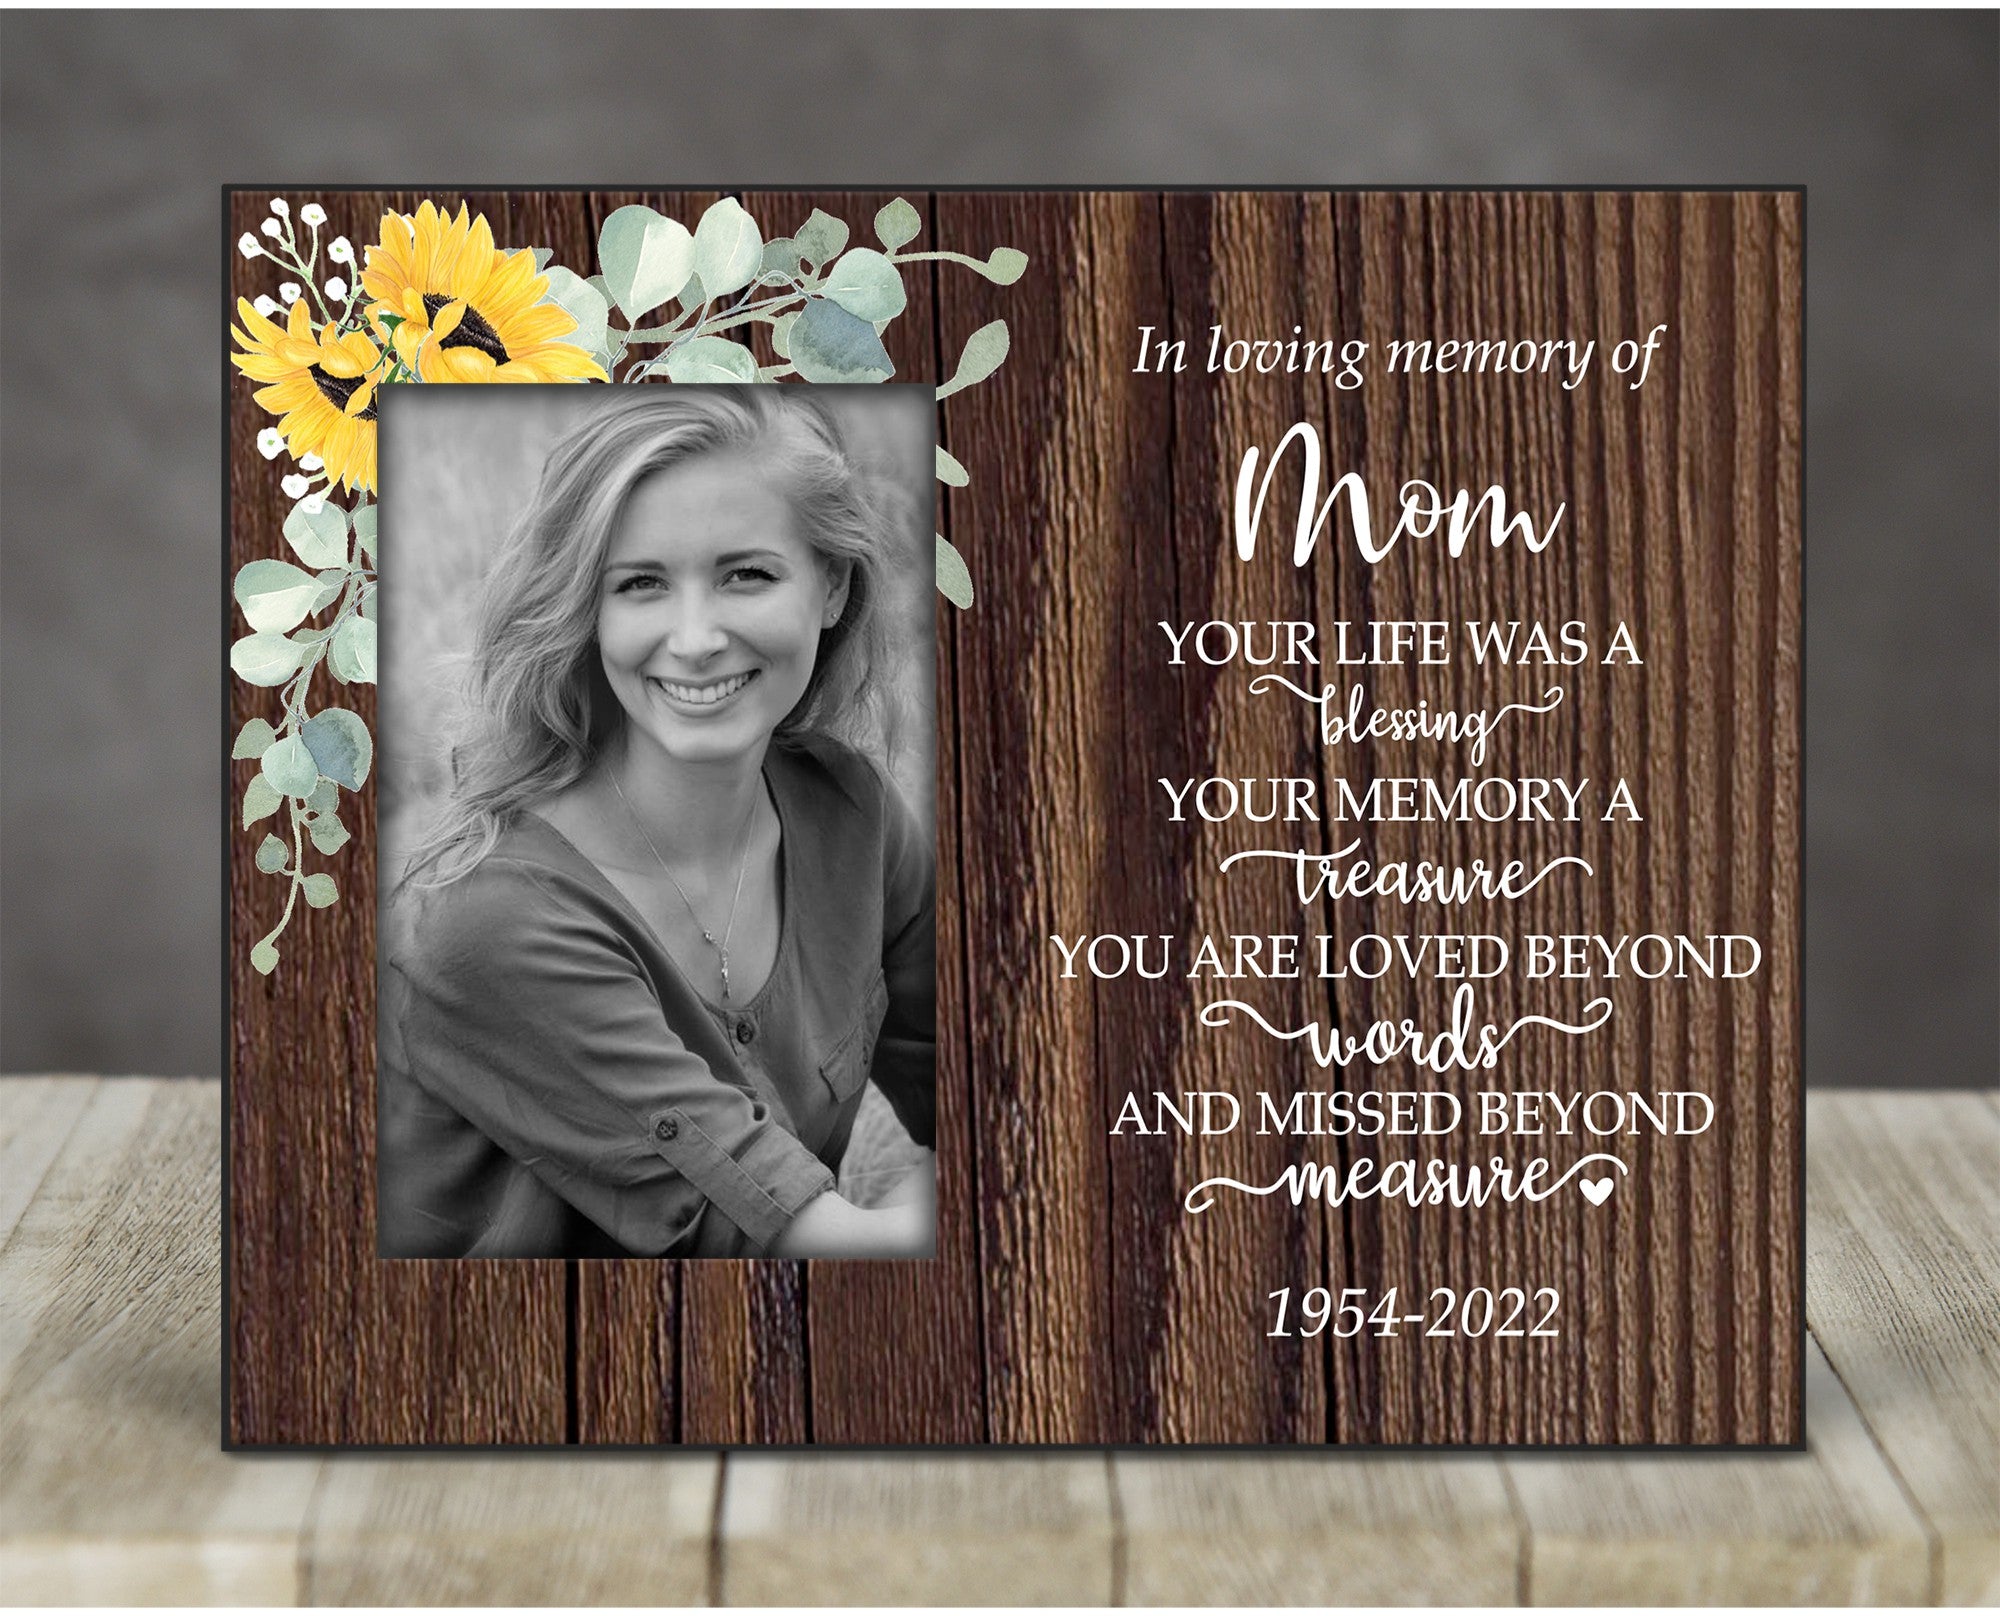 Custom Wooden Memorial Double Picture Frame Holds 2-4x6 Photo - in Loving Memory Gone White